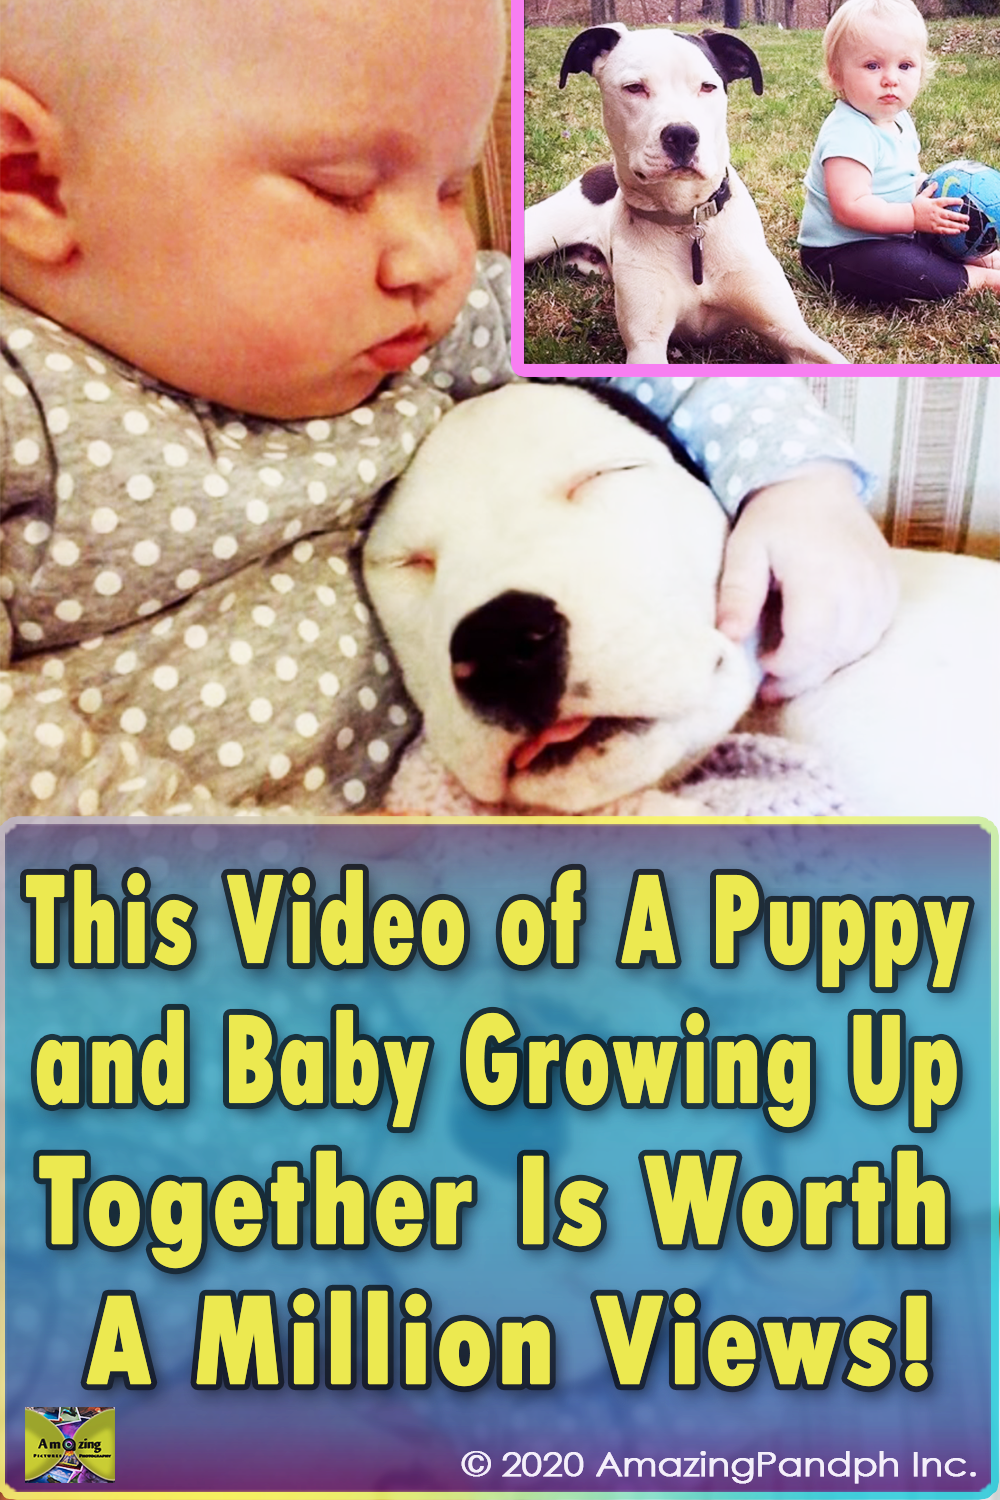 Puppy, Baby, Growing Up, Together, cuteness, cute, adorable, Priceless, Memories,